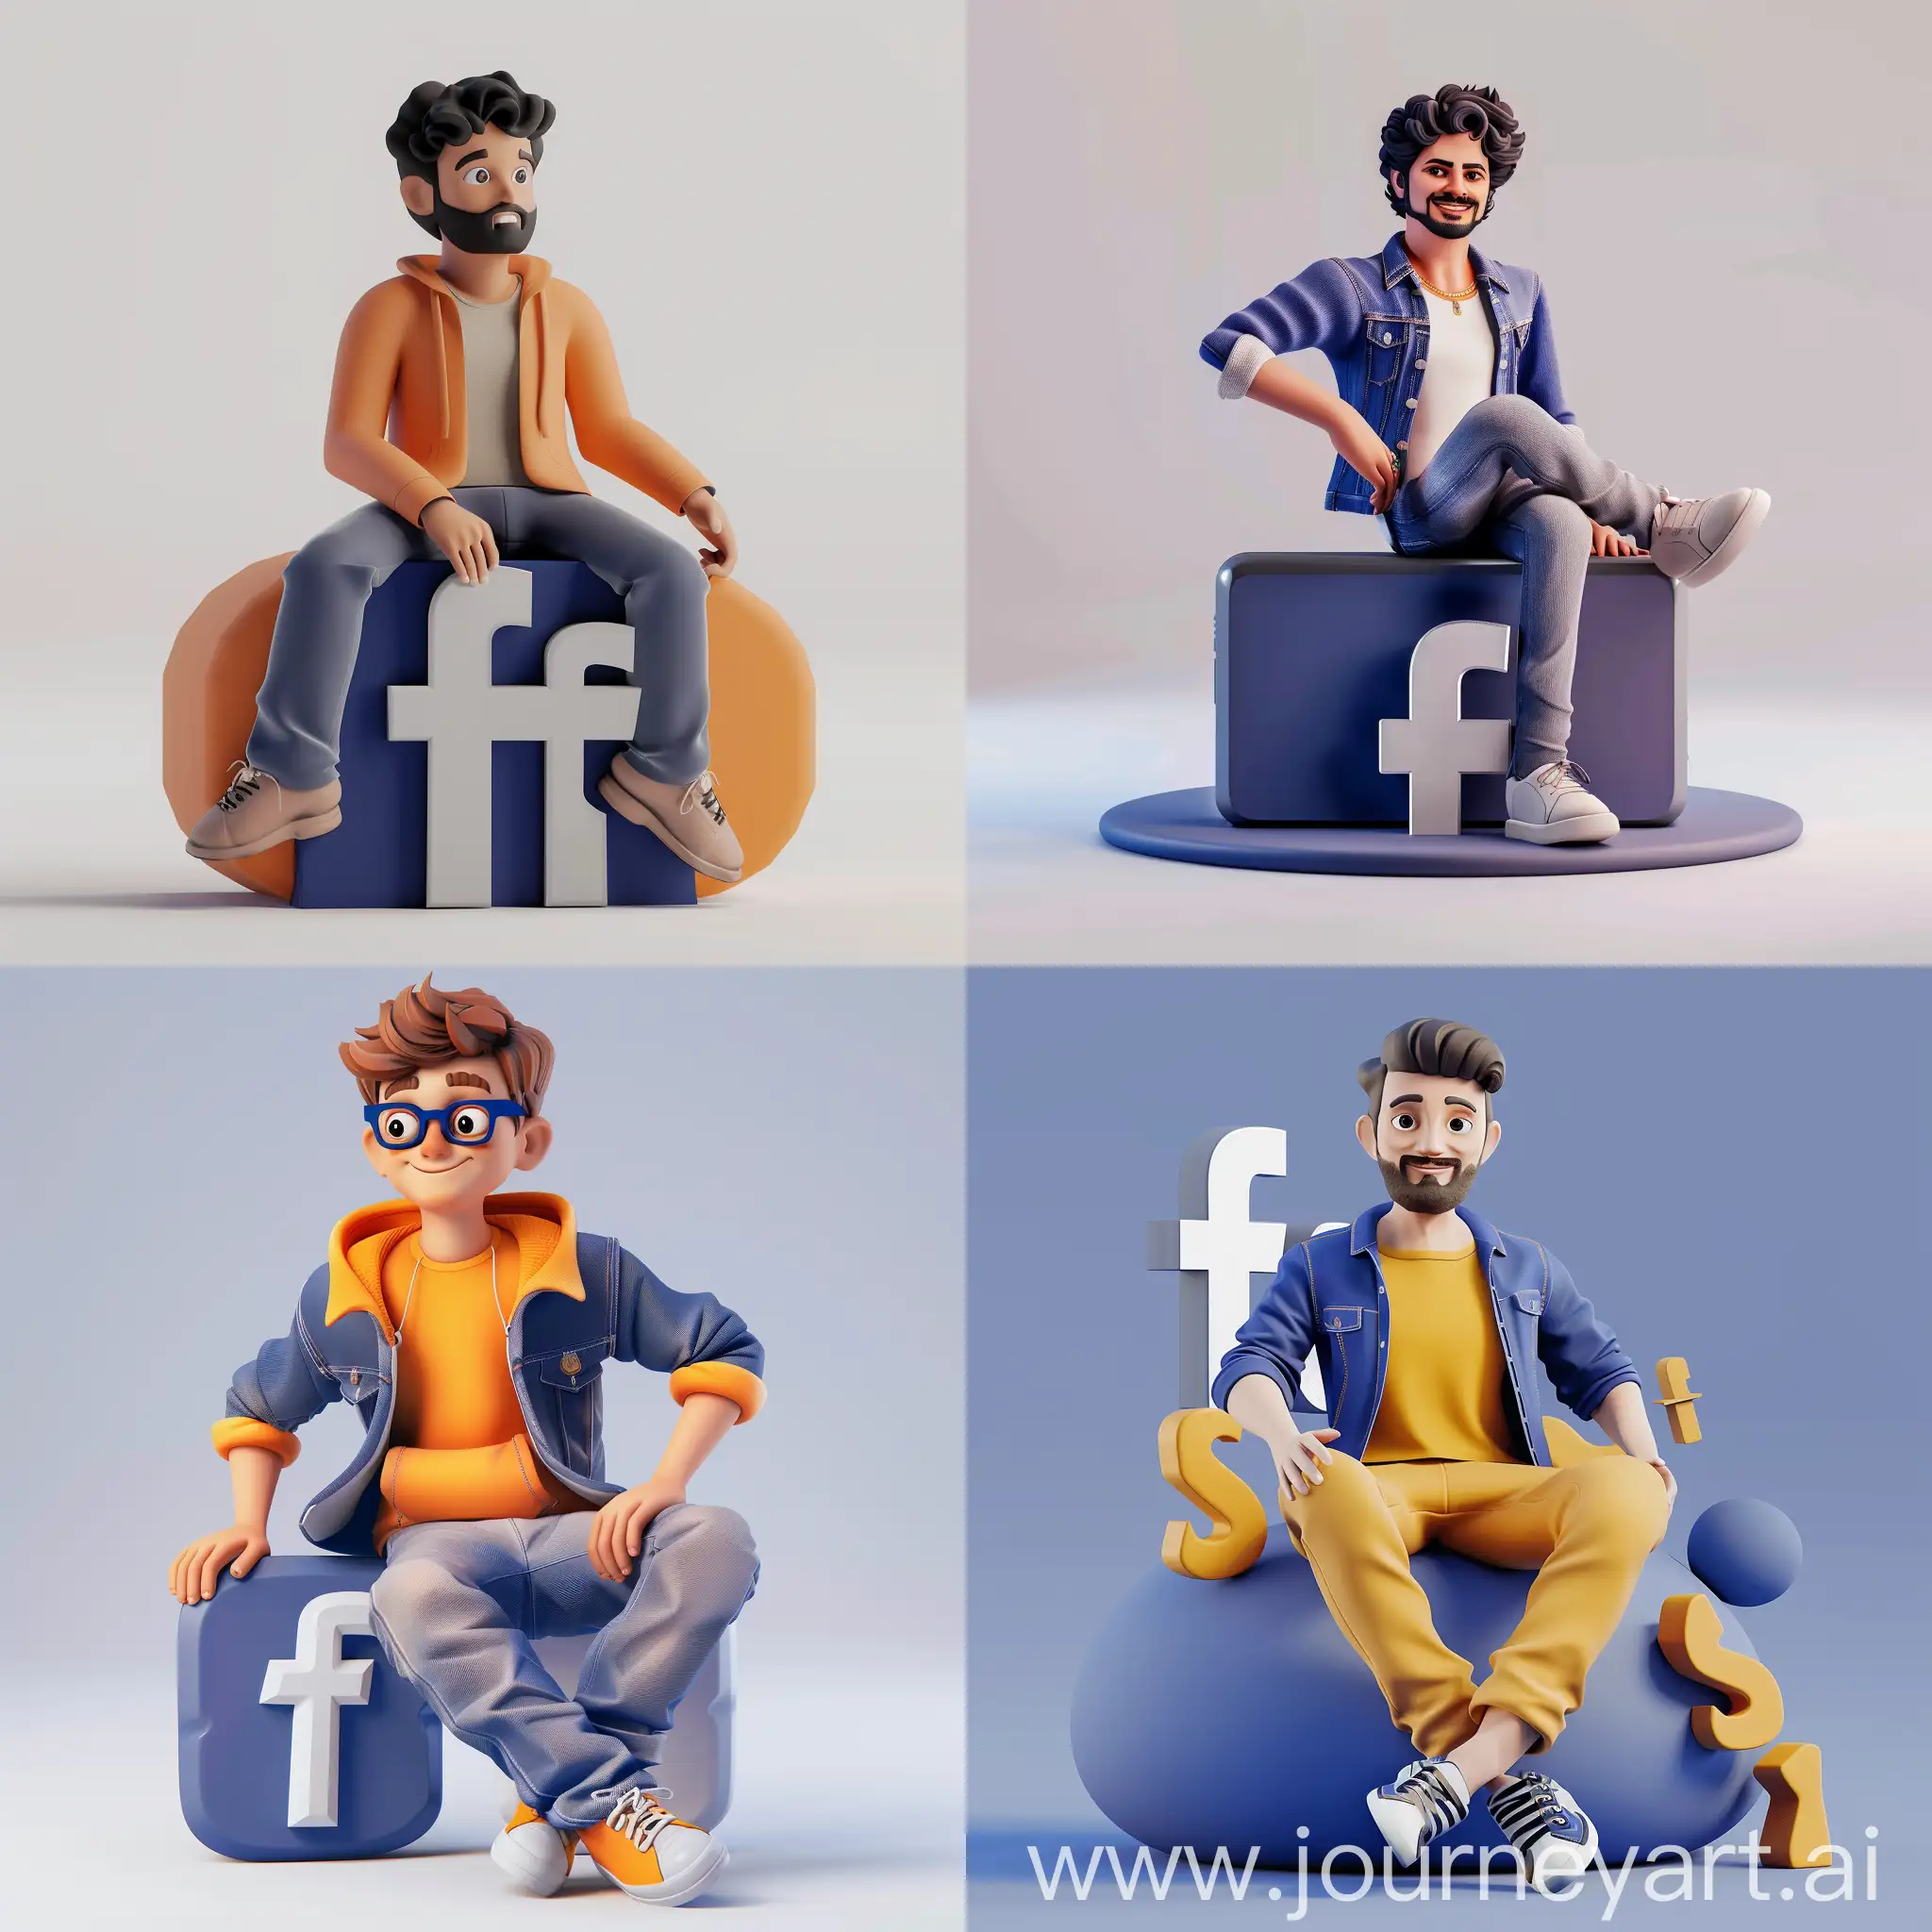 Prompt: "Create a 3D illustration of an animated character of a handsom man sitting casually on top of a social media logo "Facebook". The character must wear modern Indian clothes. The background of the character is mockup of his Facebook profile page with a profile name "Vithusan.S" and a profile picture same as character."